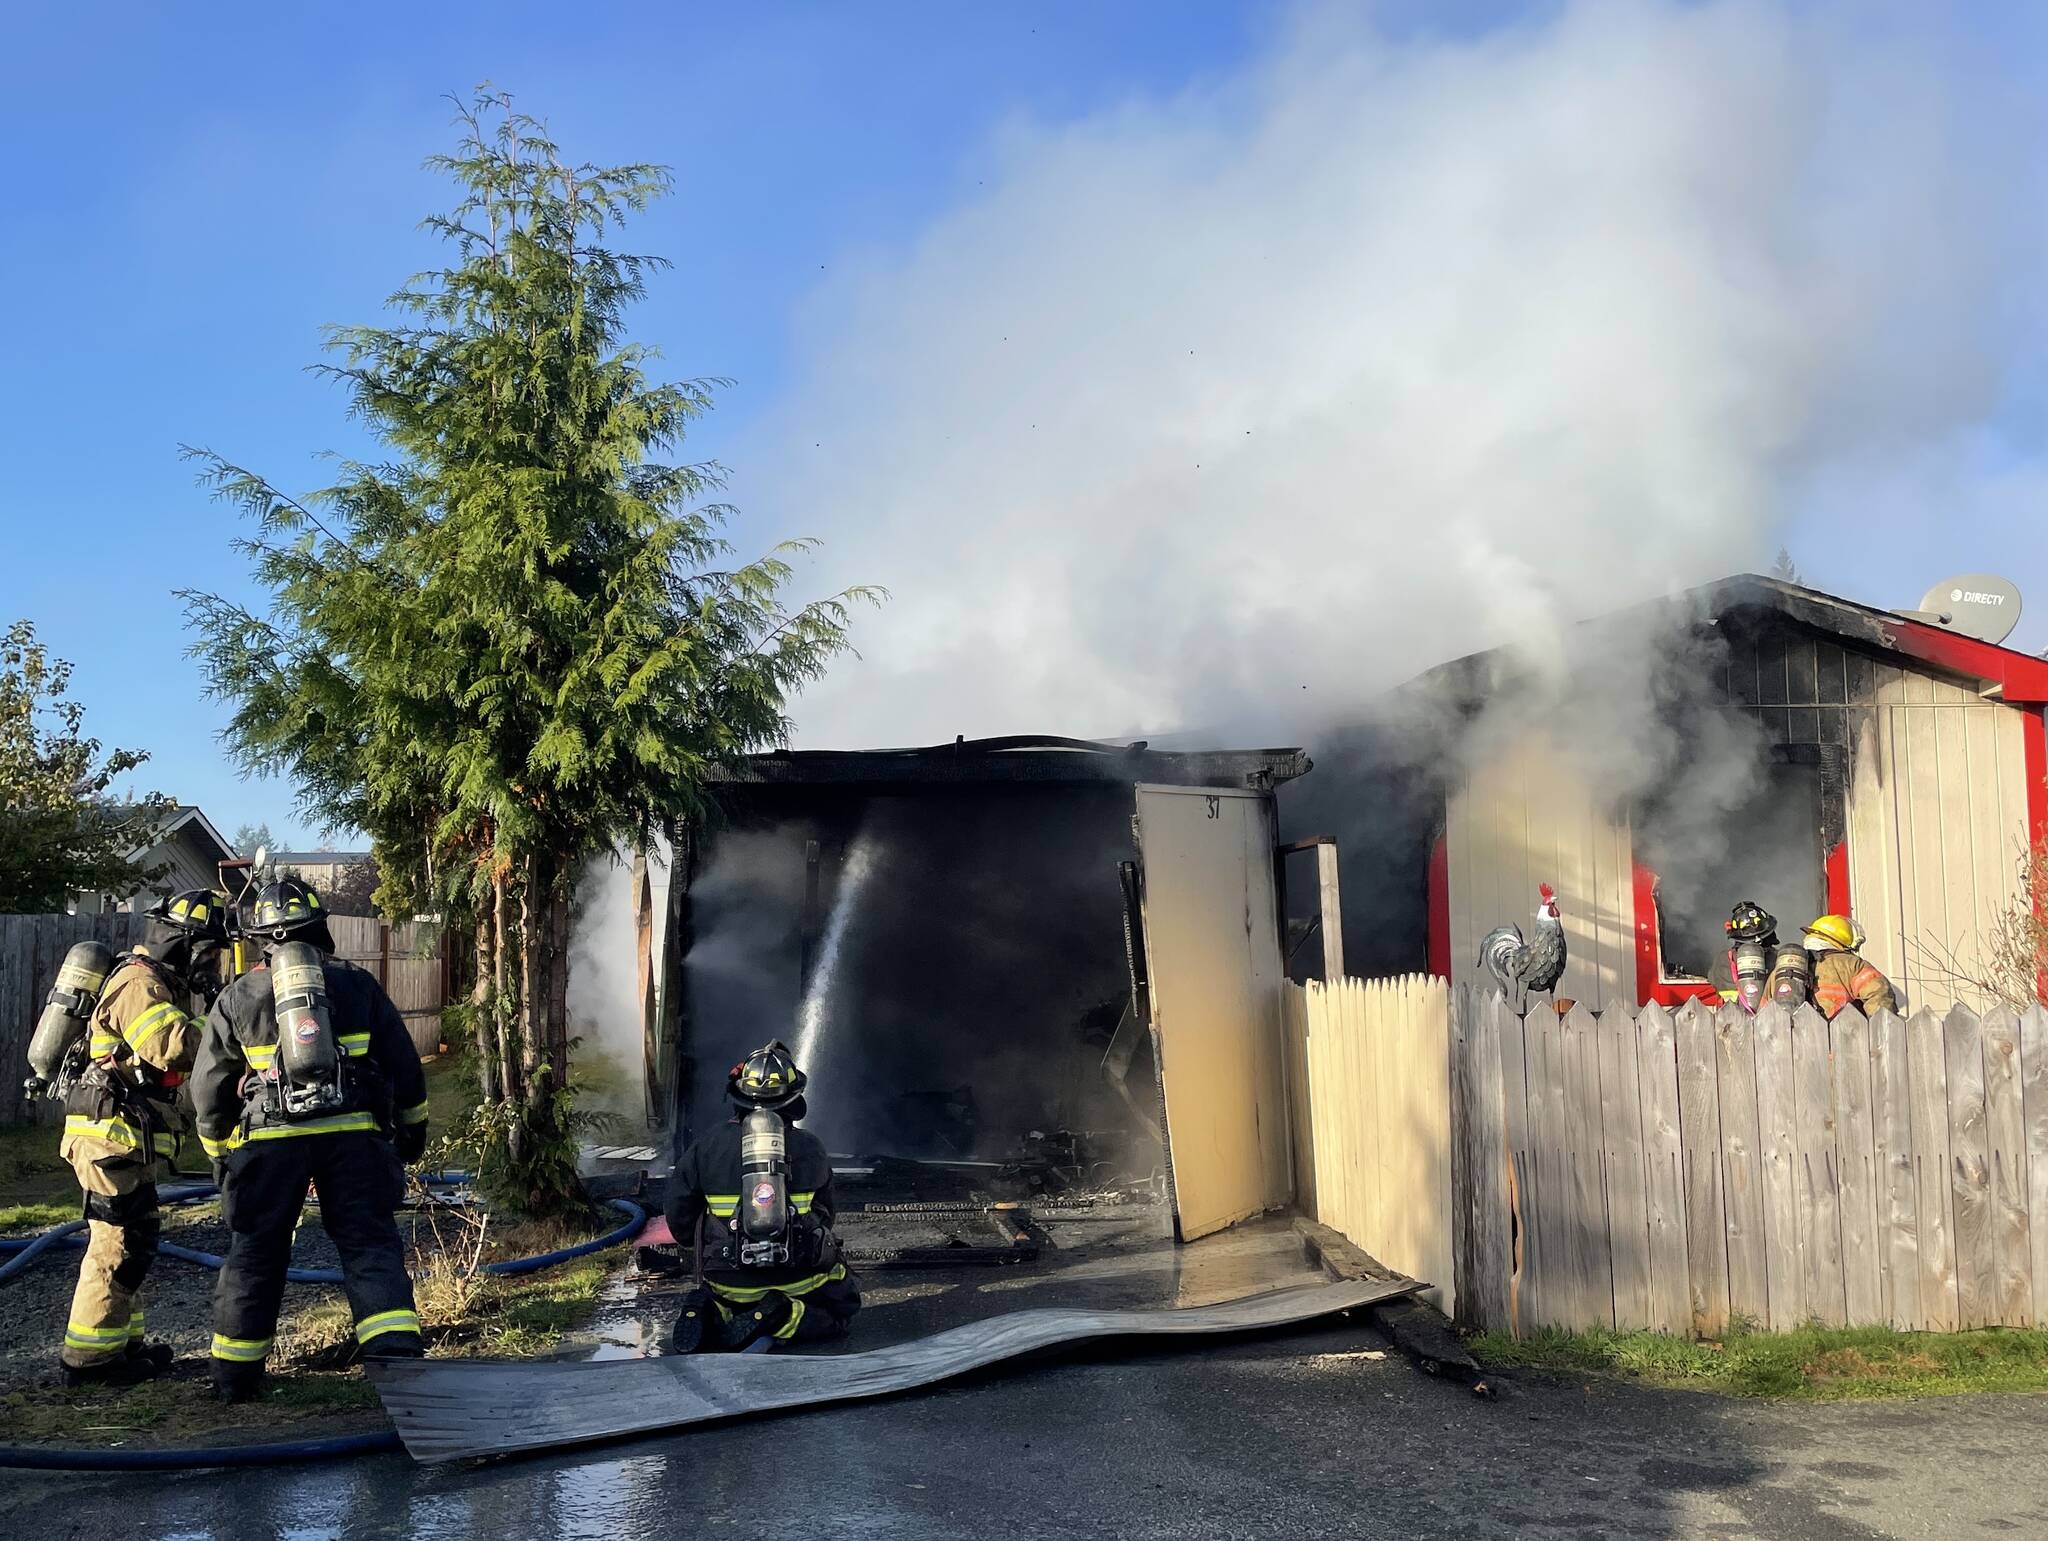 Michael S. Lockett / The Daily World
East Grays Harbor Fire and Rescue and the Montesano Fire Department responded to a trailer fire early on Tuesday, Nov. 15.